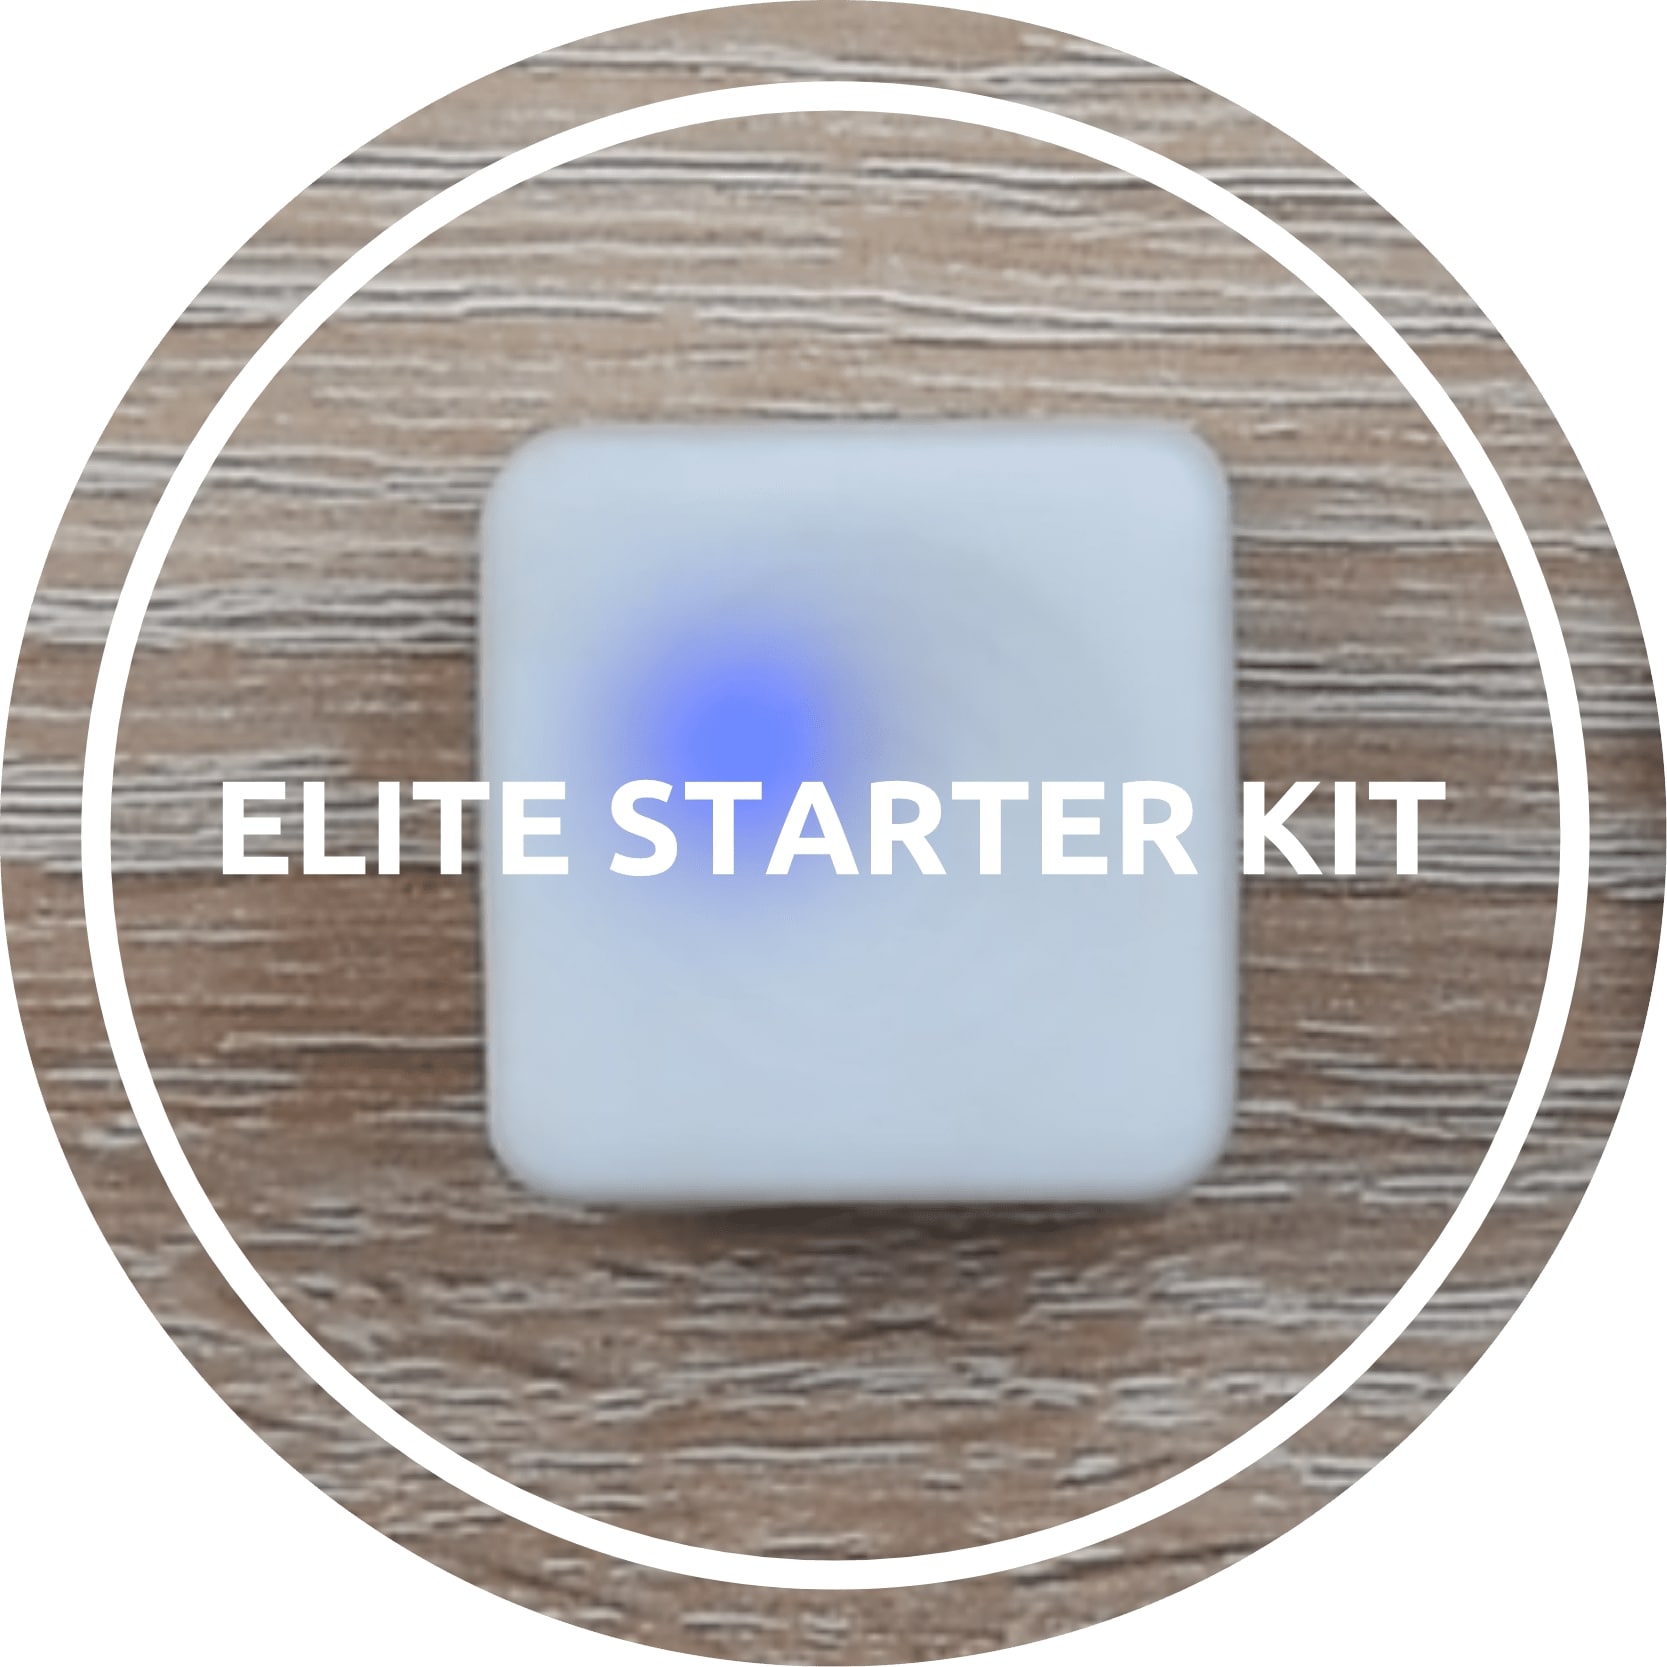 The Elite Starter Kit includes the following Blebricks: 1 packaged BLE-B and 1 packaged RPS.